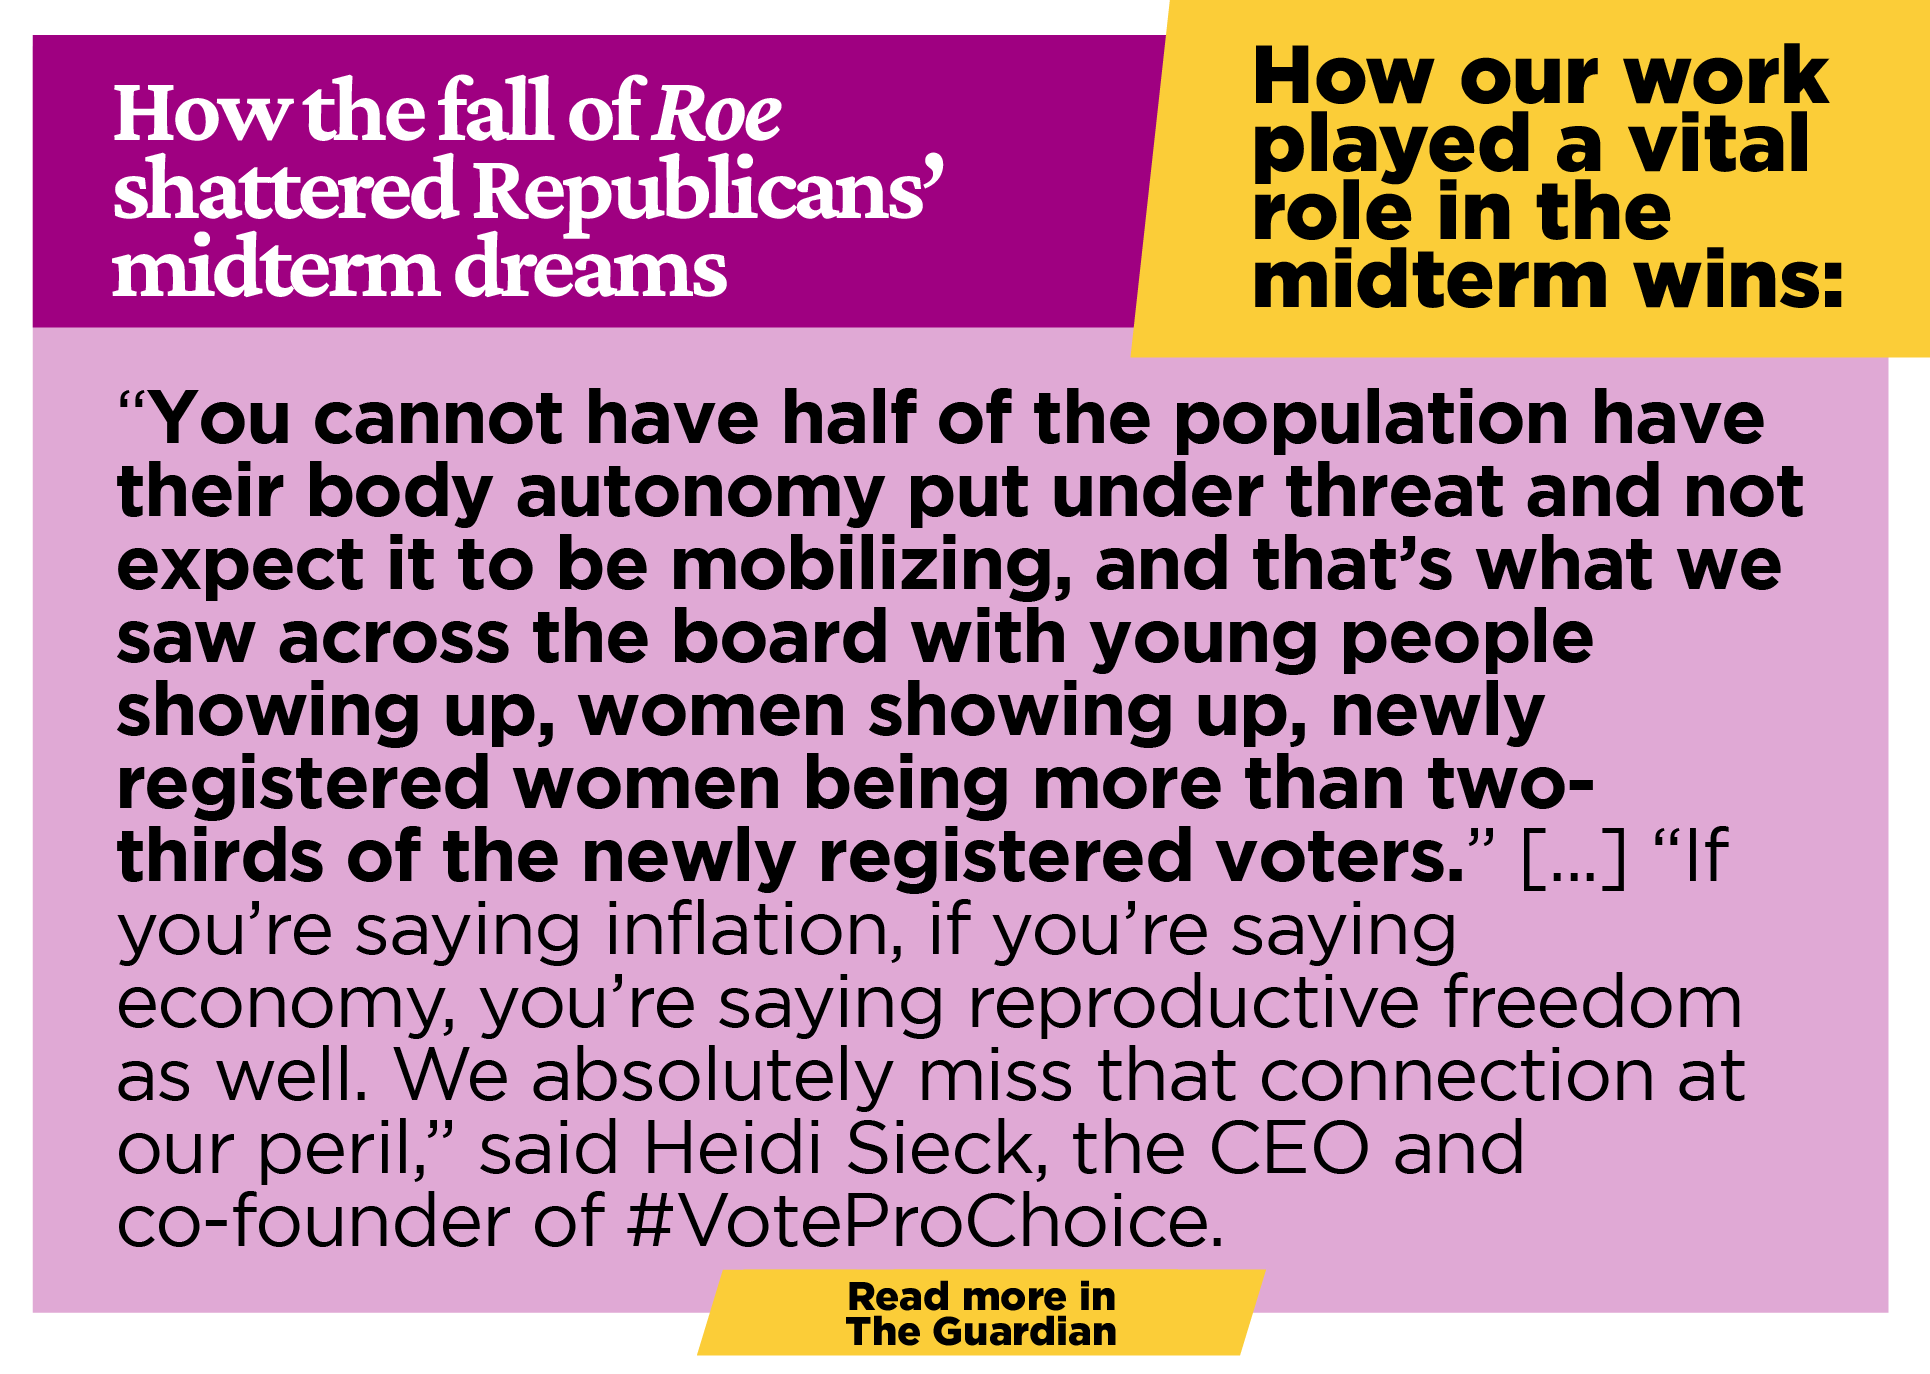 How our work played a vital role in the midterm wins: How the fall of Roe shattered Republicans' midterm dreams: “You cannot have half of the population have their body autonomy put under threat and not expect it to be mobilizing, and that’s what we saw across the board with young people showing up, women showing up, newly registered women being more than two- thirds of the newly registered voters.” [...] “If you’re saying inflation, if you’re saying economy, you’re saying reproductive freedom as well. We absolutely miss that connection at our peril,” said Heidi Sieck, the CEO and co-founder of #VoteProChoice. Read more in the Guardian